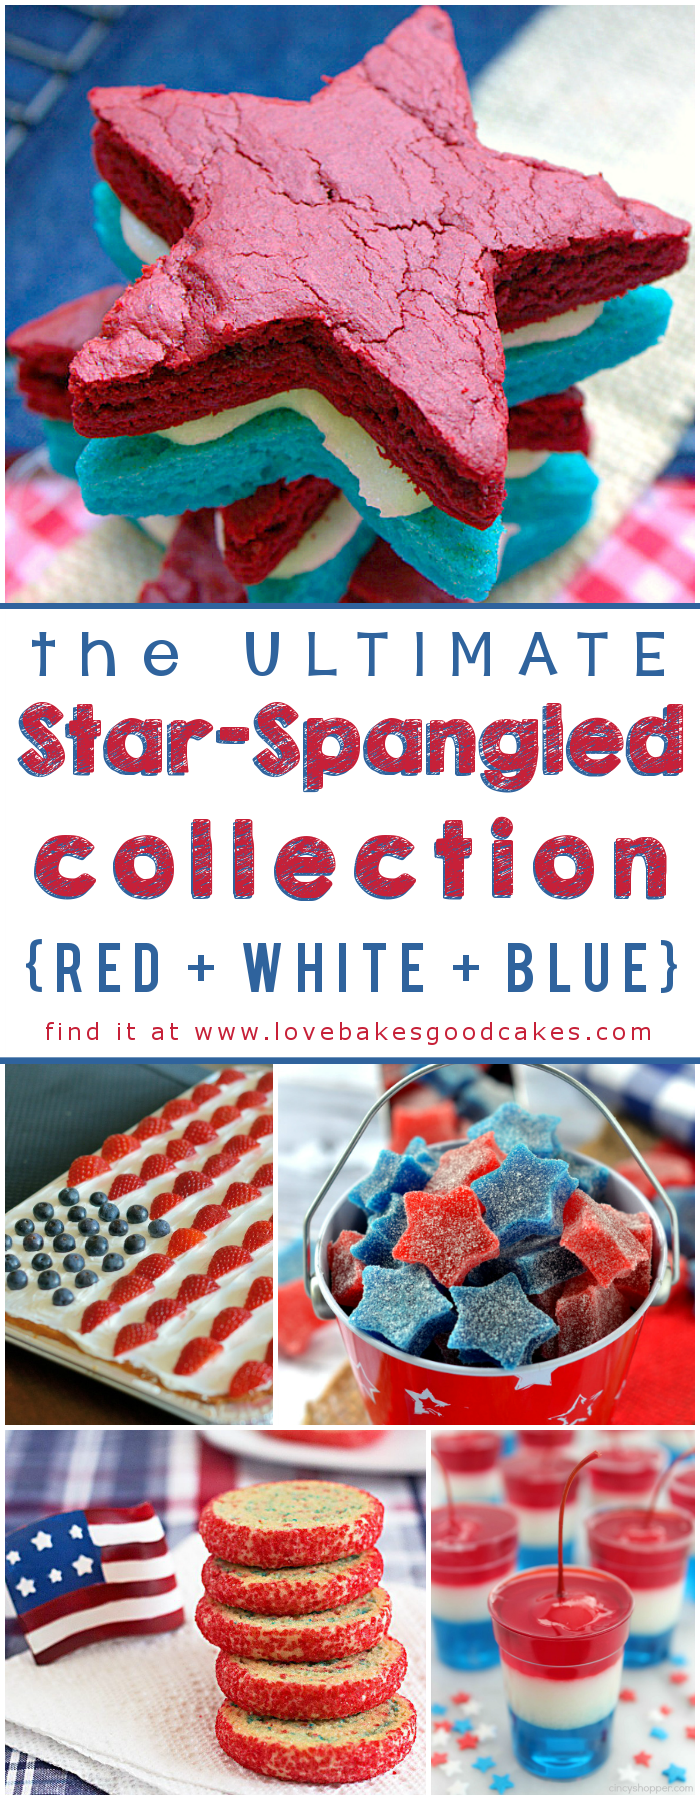 the ultimate star-spangled collection! (red white blue)